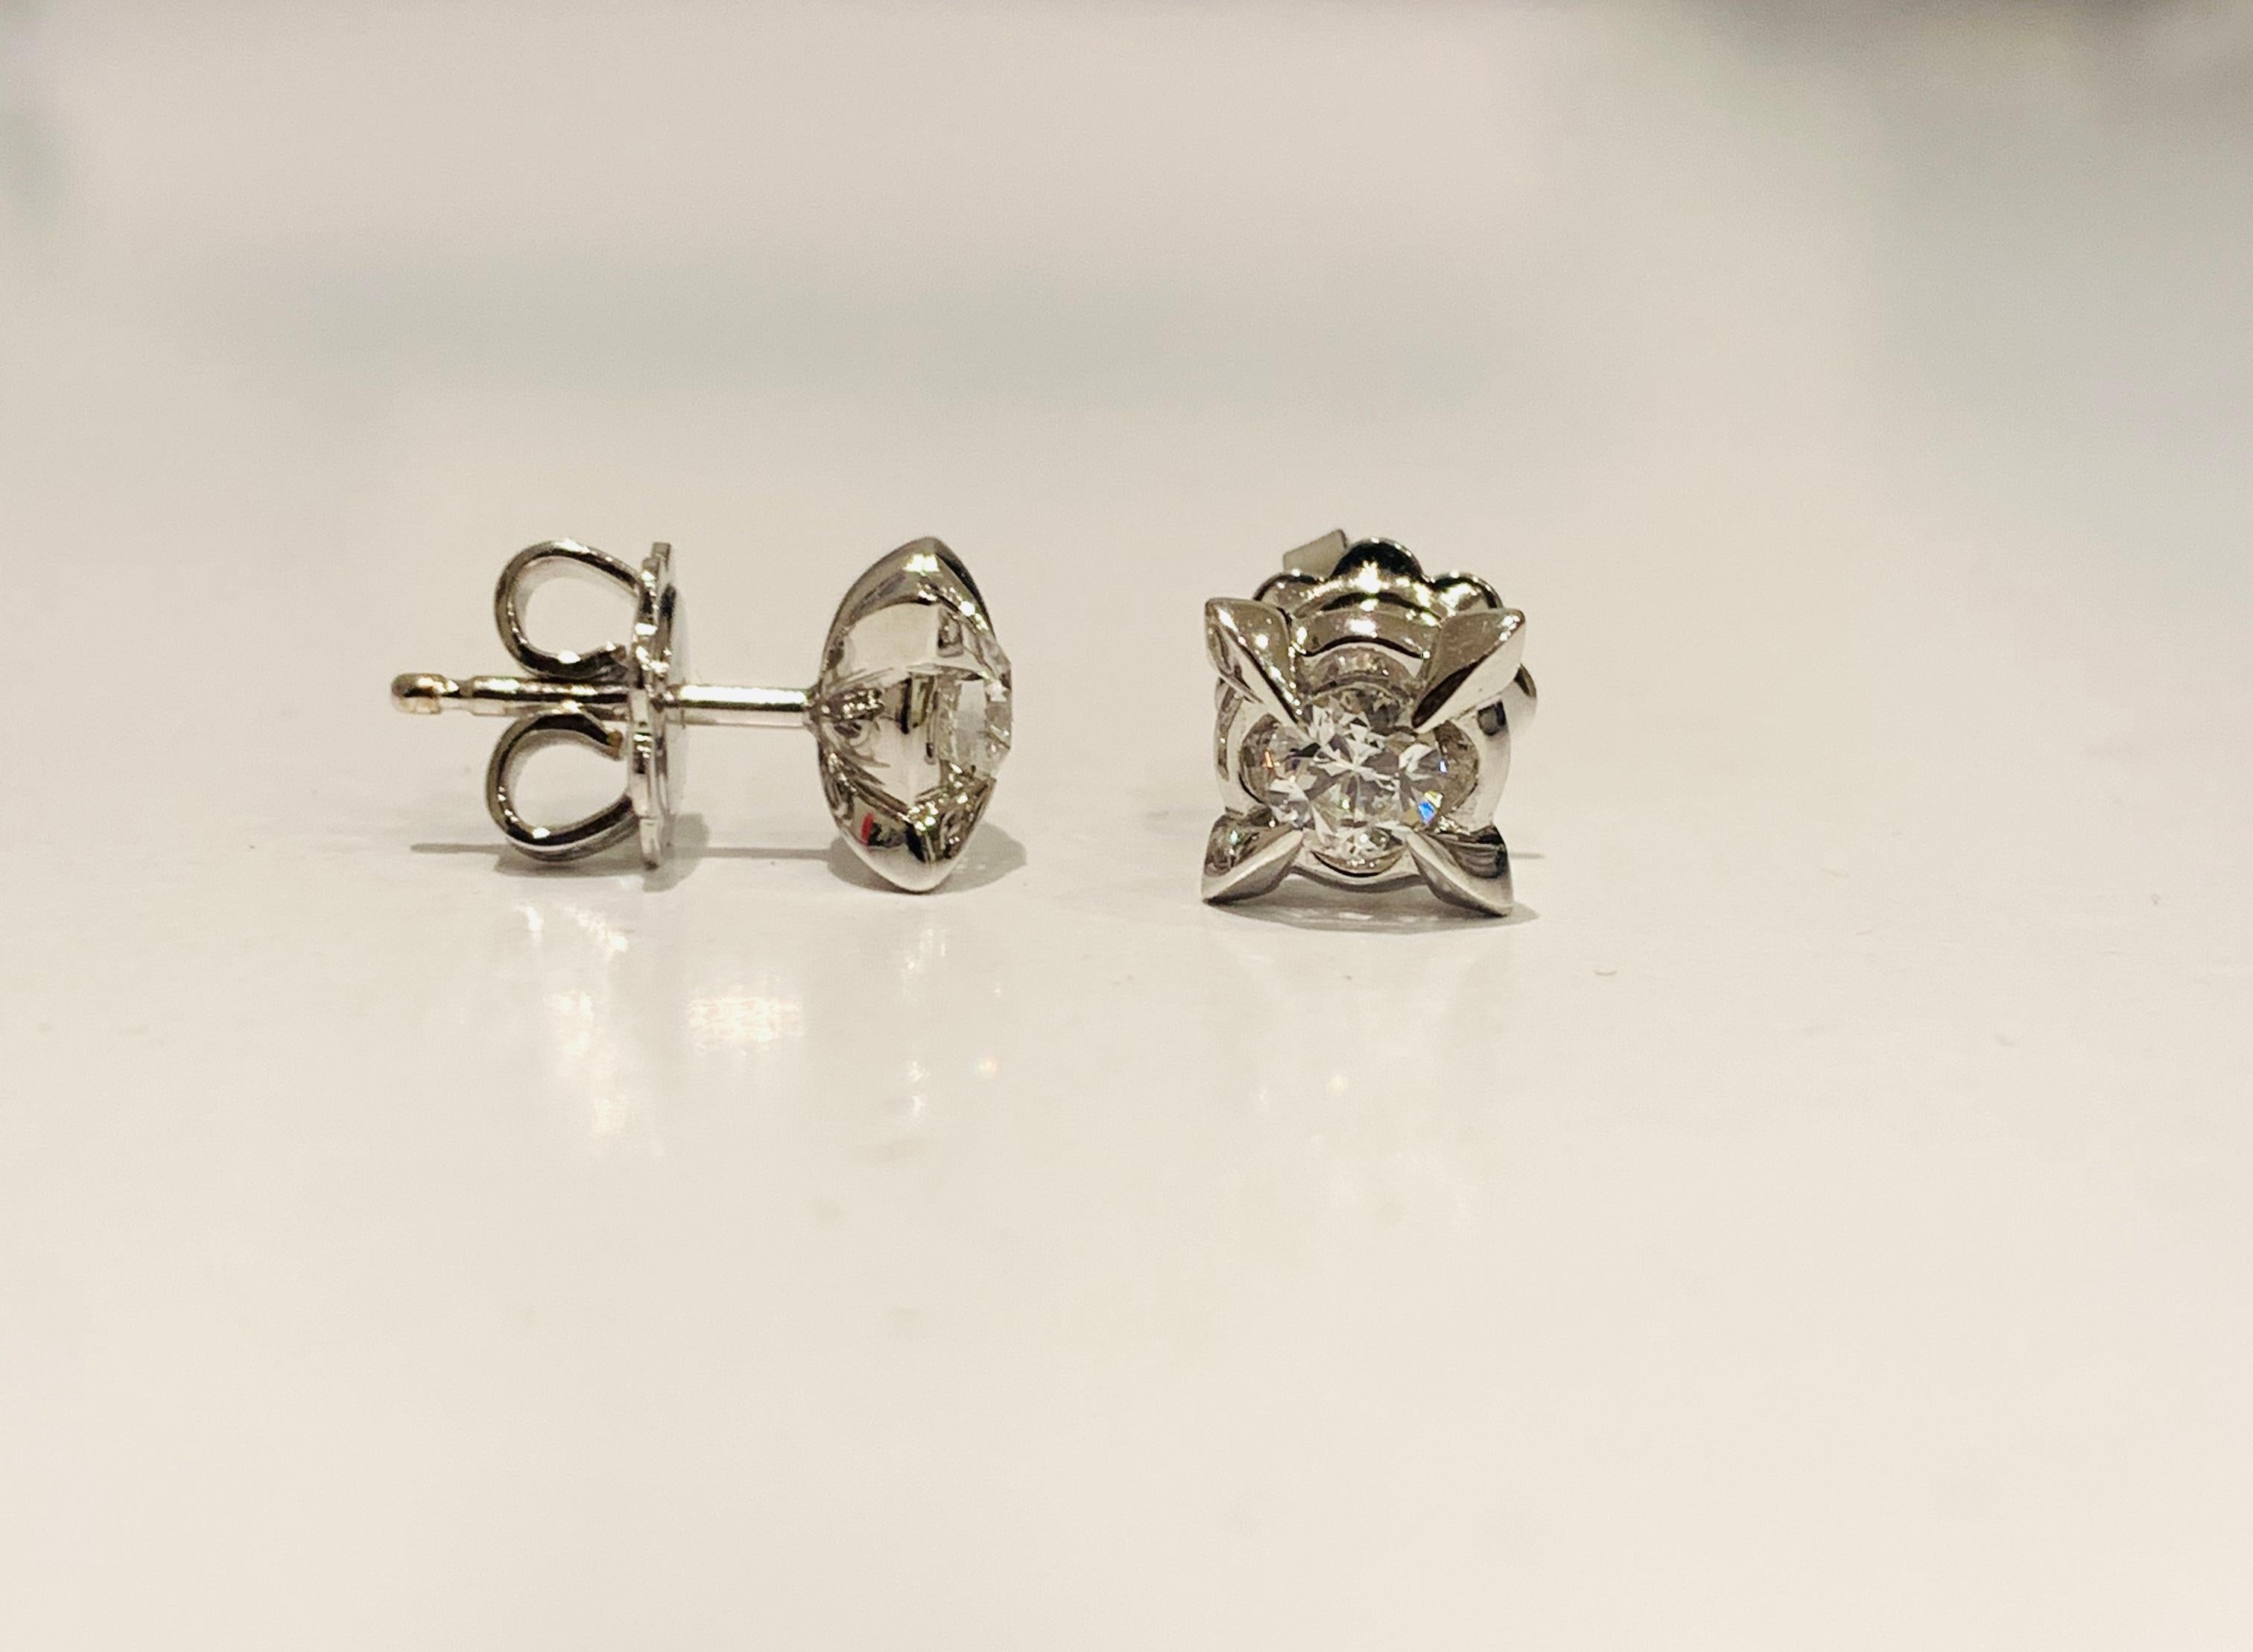 These 0.47 Carat Diamond stud earrings are set in 18Kt white Gold. From the Leonardo da Vinci Cut Renaissance line. The diamond was cut using the divine proportions and is based on Leonardo's stone drawings. 

Secured on the ear with butterfly back